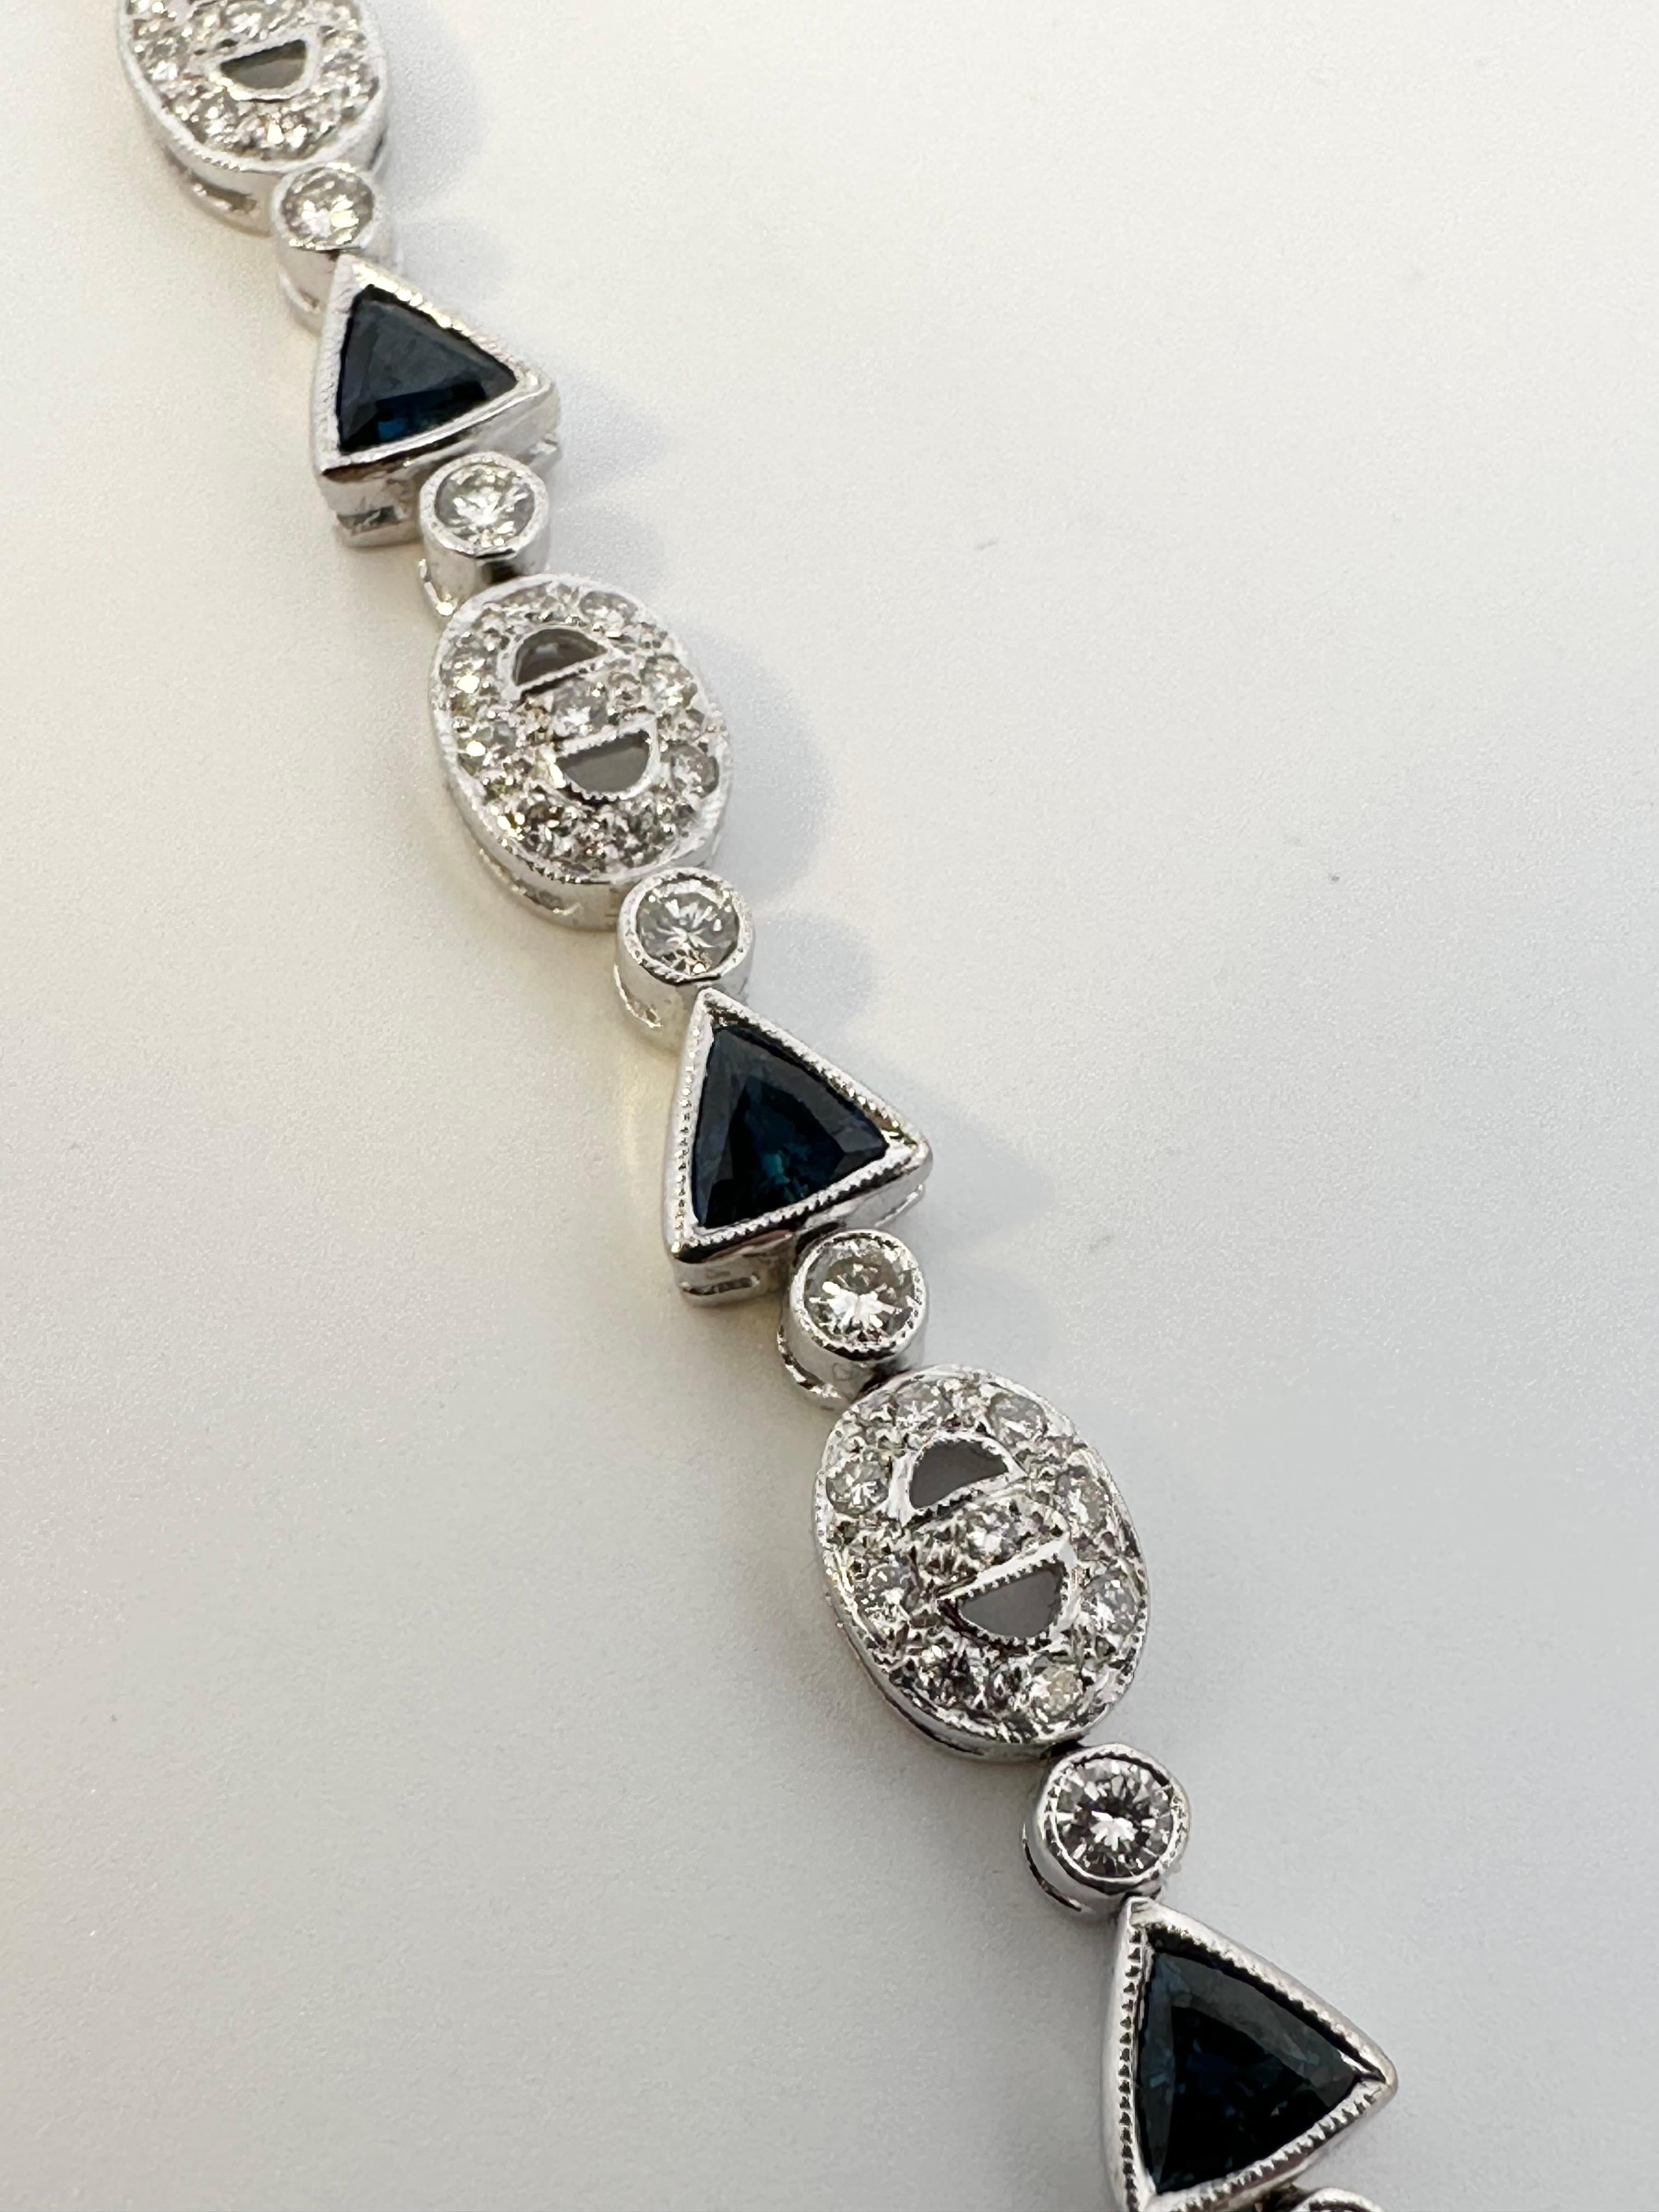 One 18kt white gold bracelet set with trillion cut natural blue sapphires and brilliant cut diamonds. Perfect for everyday with a little splash of colour. 

11 trillion cut natural blue sapphires weighing 2.75ct total weight

121 brilliant cut